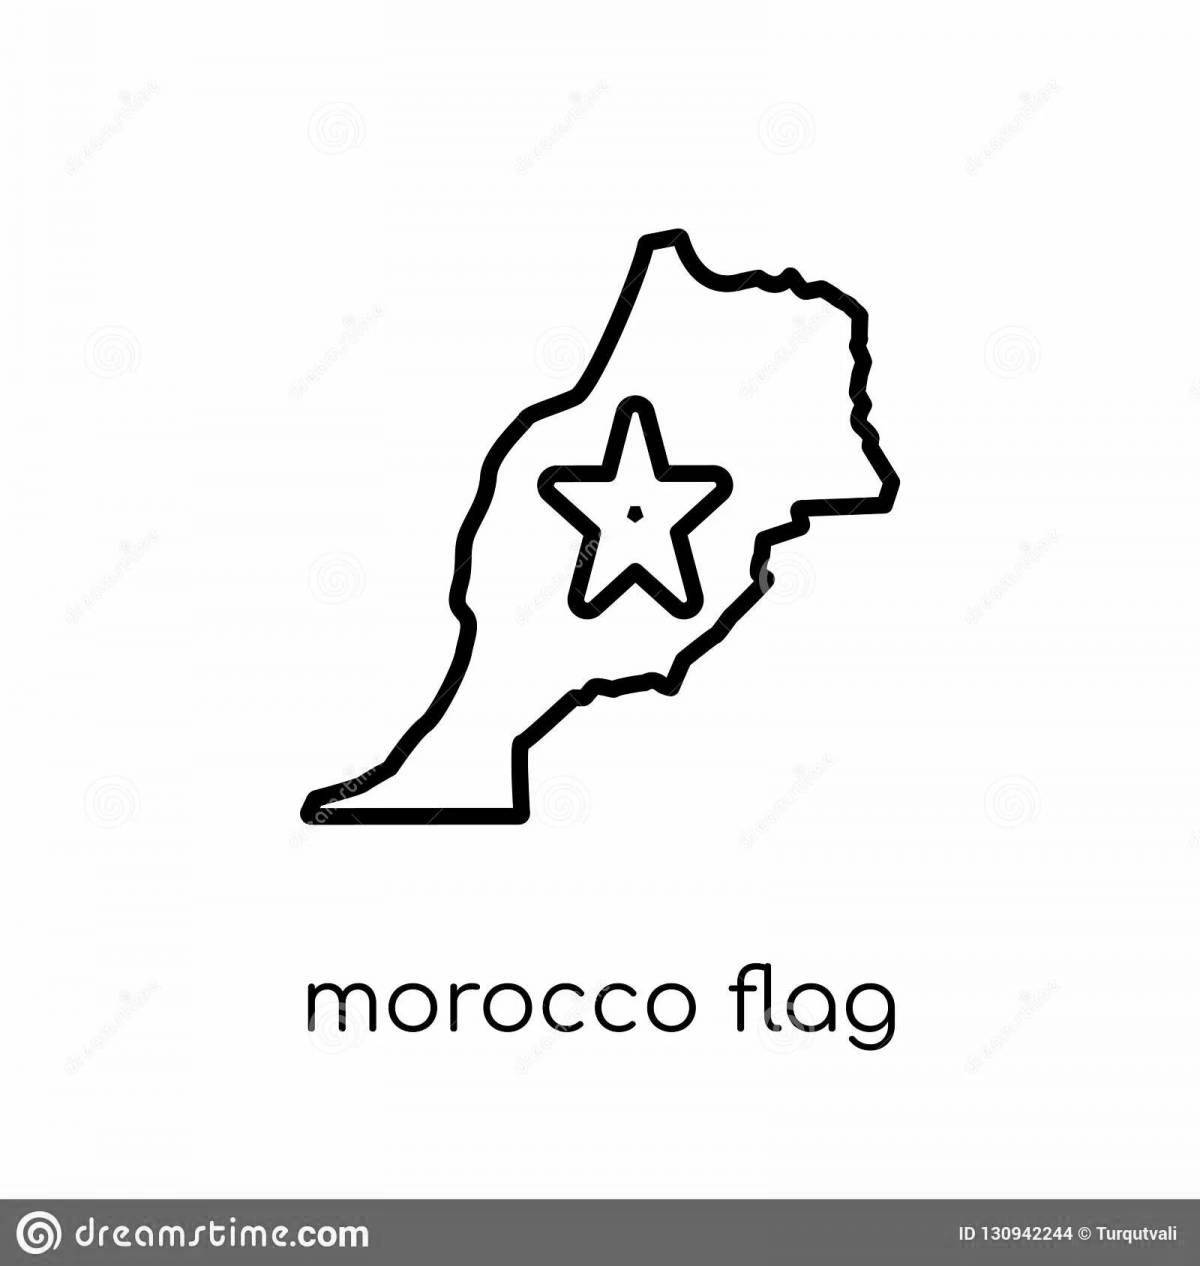 Coloring page with morocco flag